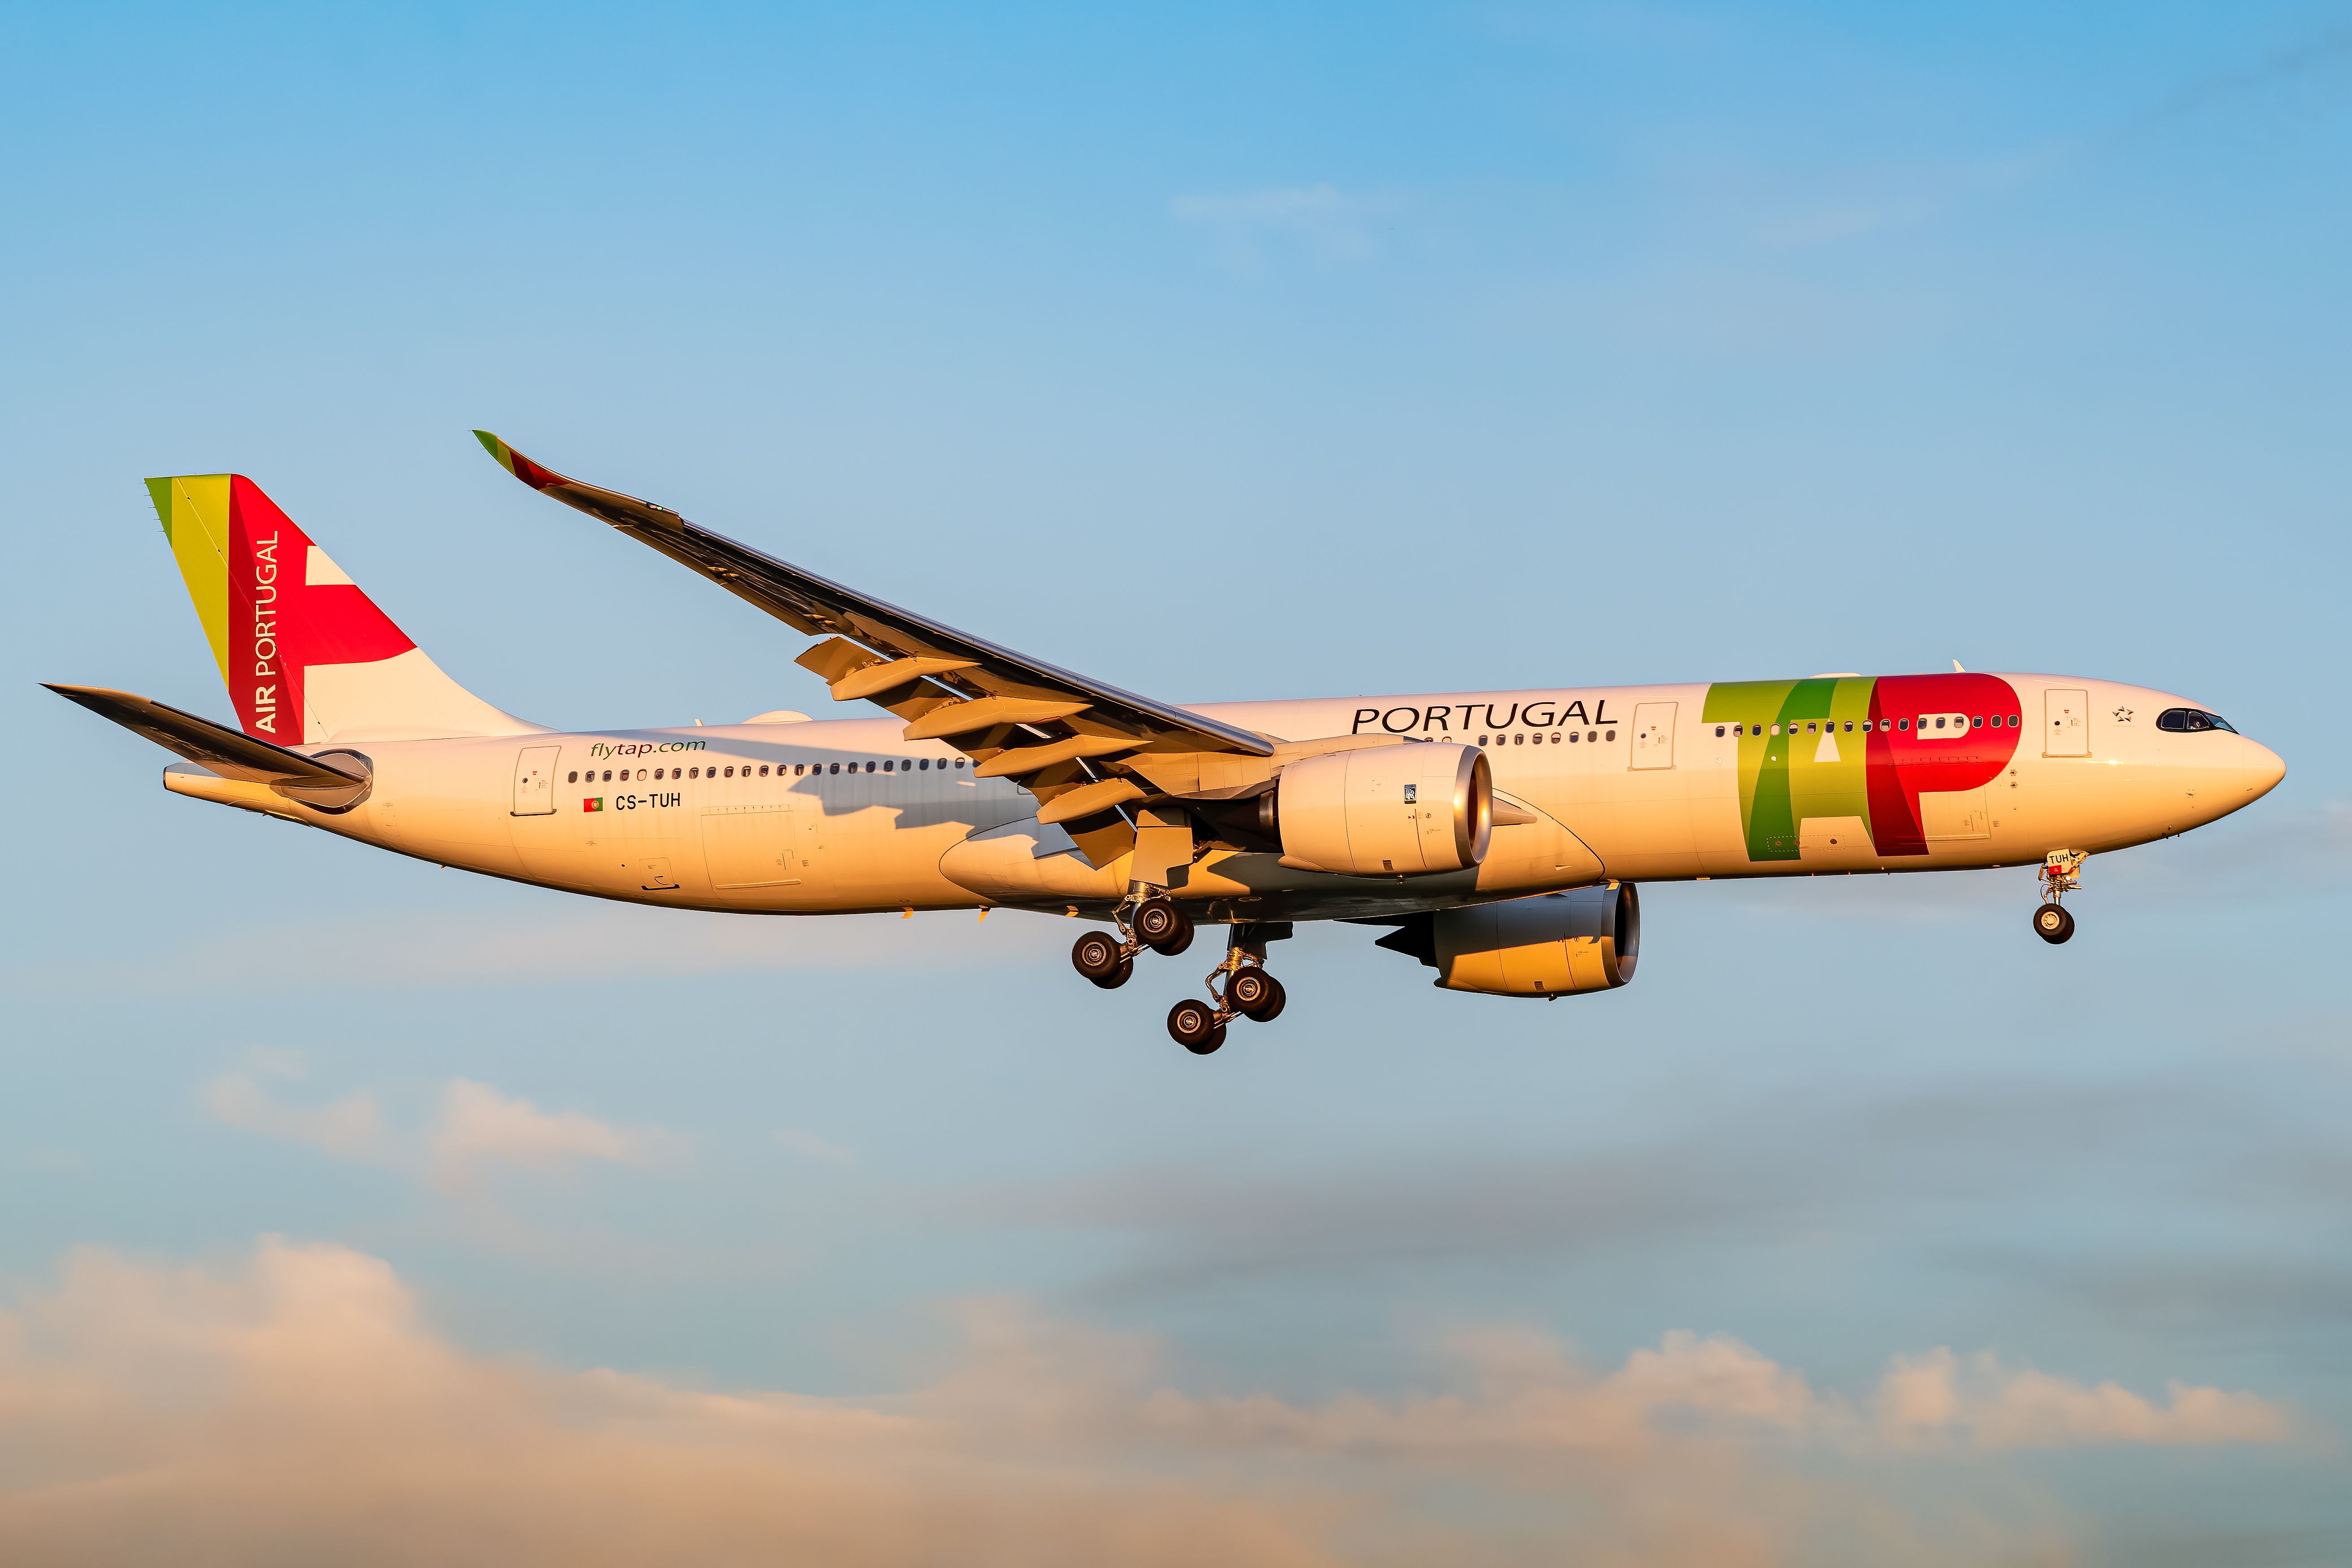 TAP Air Portugal Airbus A330 on approach to land